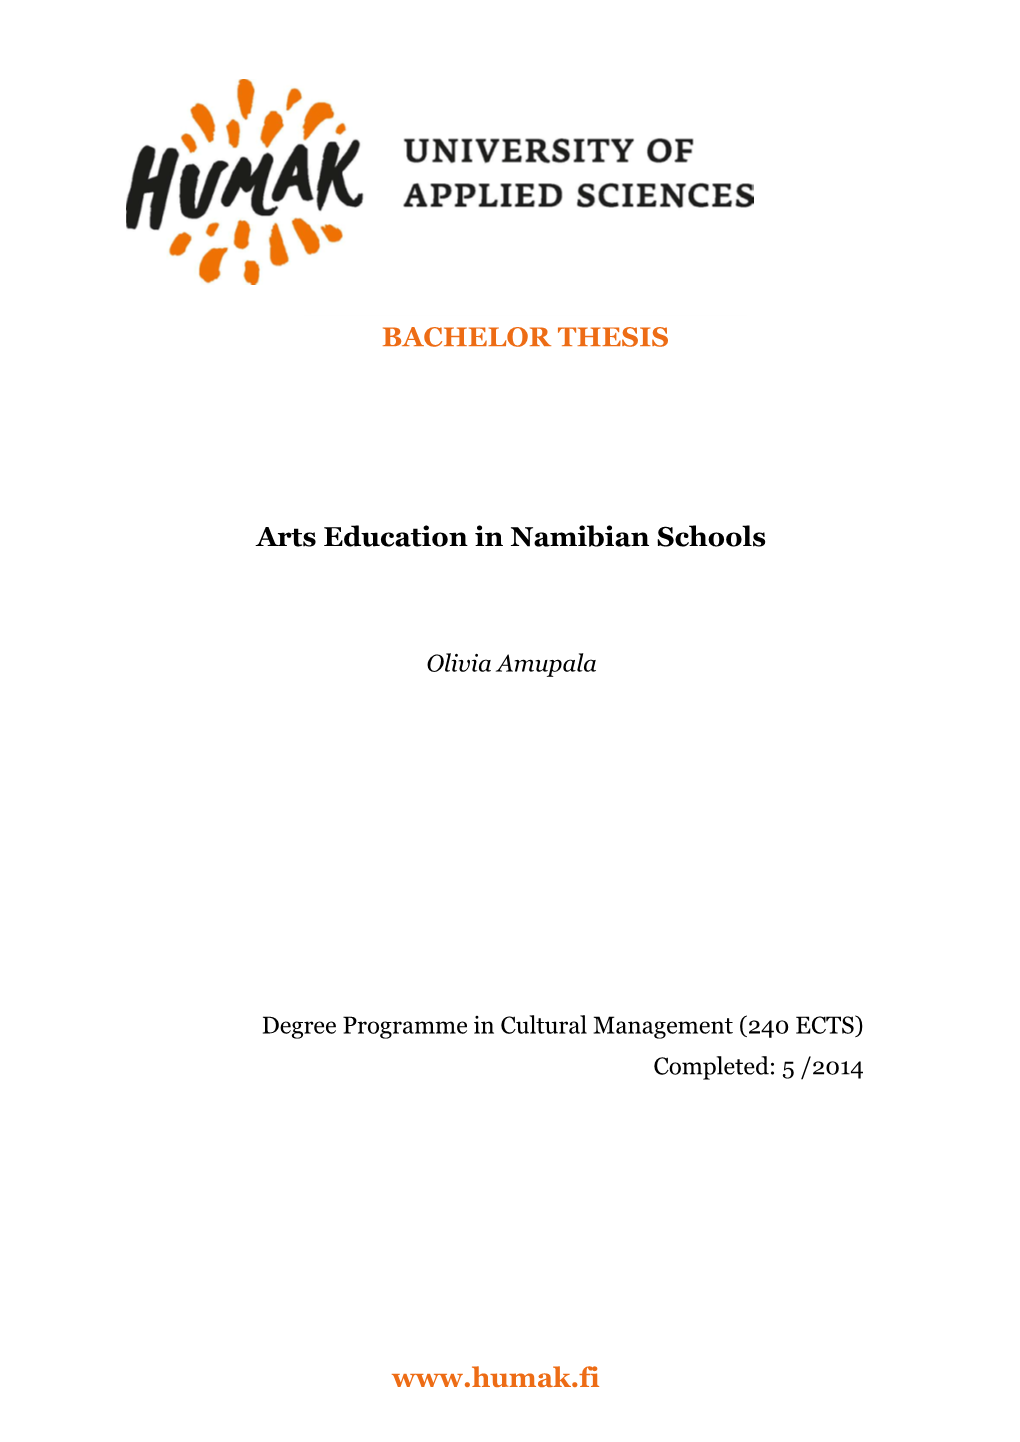 BACHELOR THESIS Arts Education in Namibian Schools